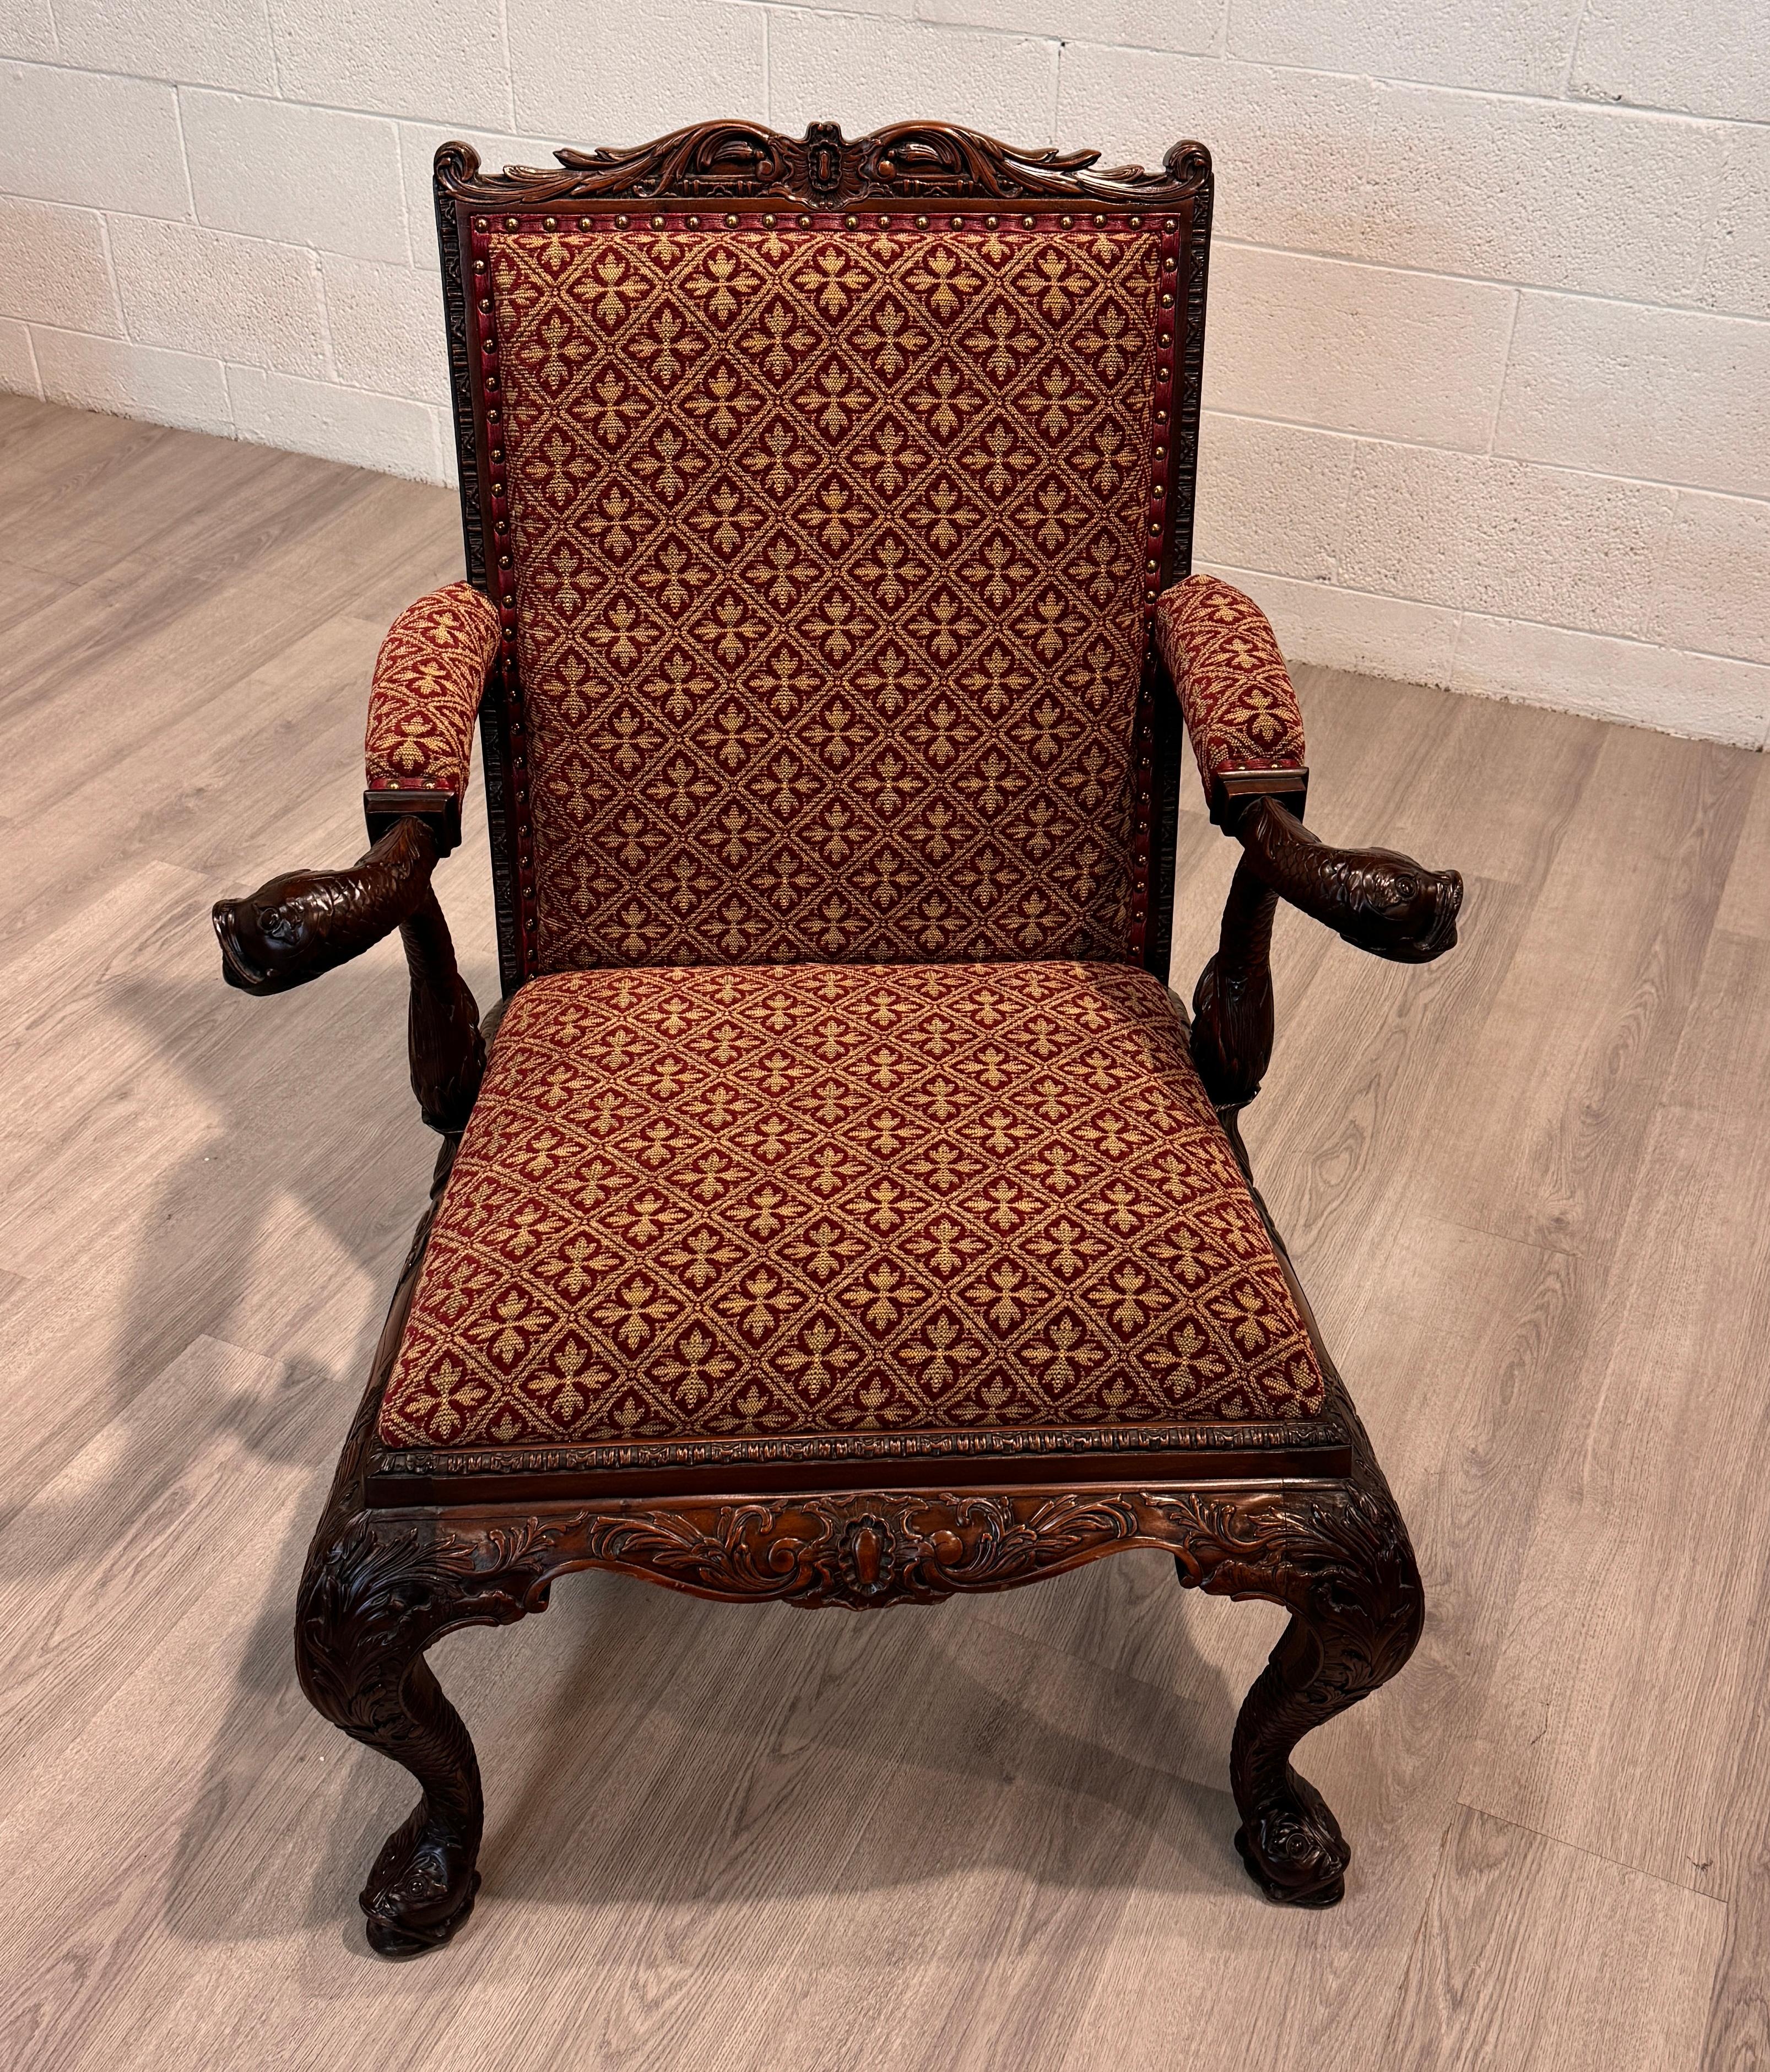 A fine example of Chippendale detail in this ornately craved arm chair.  This particular item came to us from Indonesia by way of England where it would have looked right at home in the finest of English libraries. The quality of  timber used gives